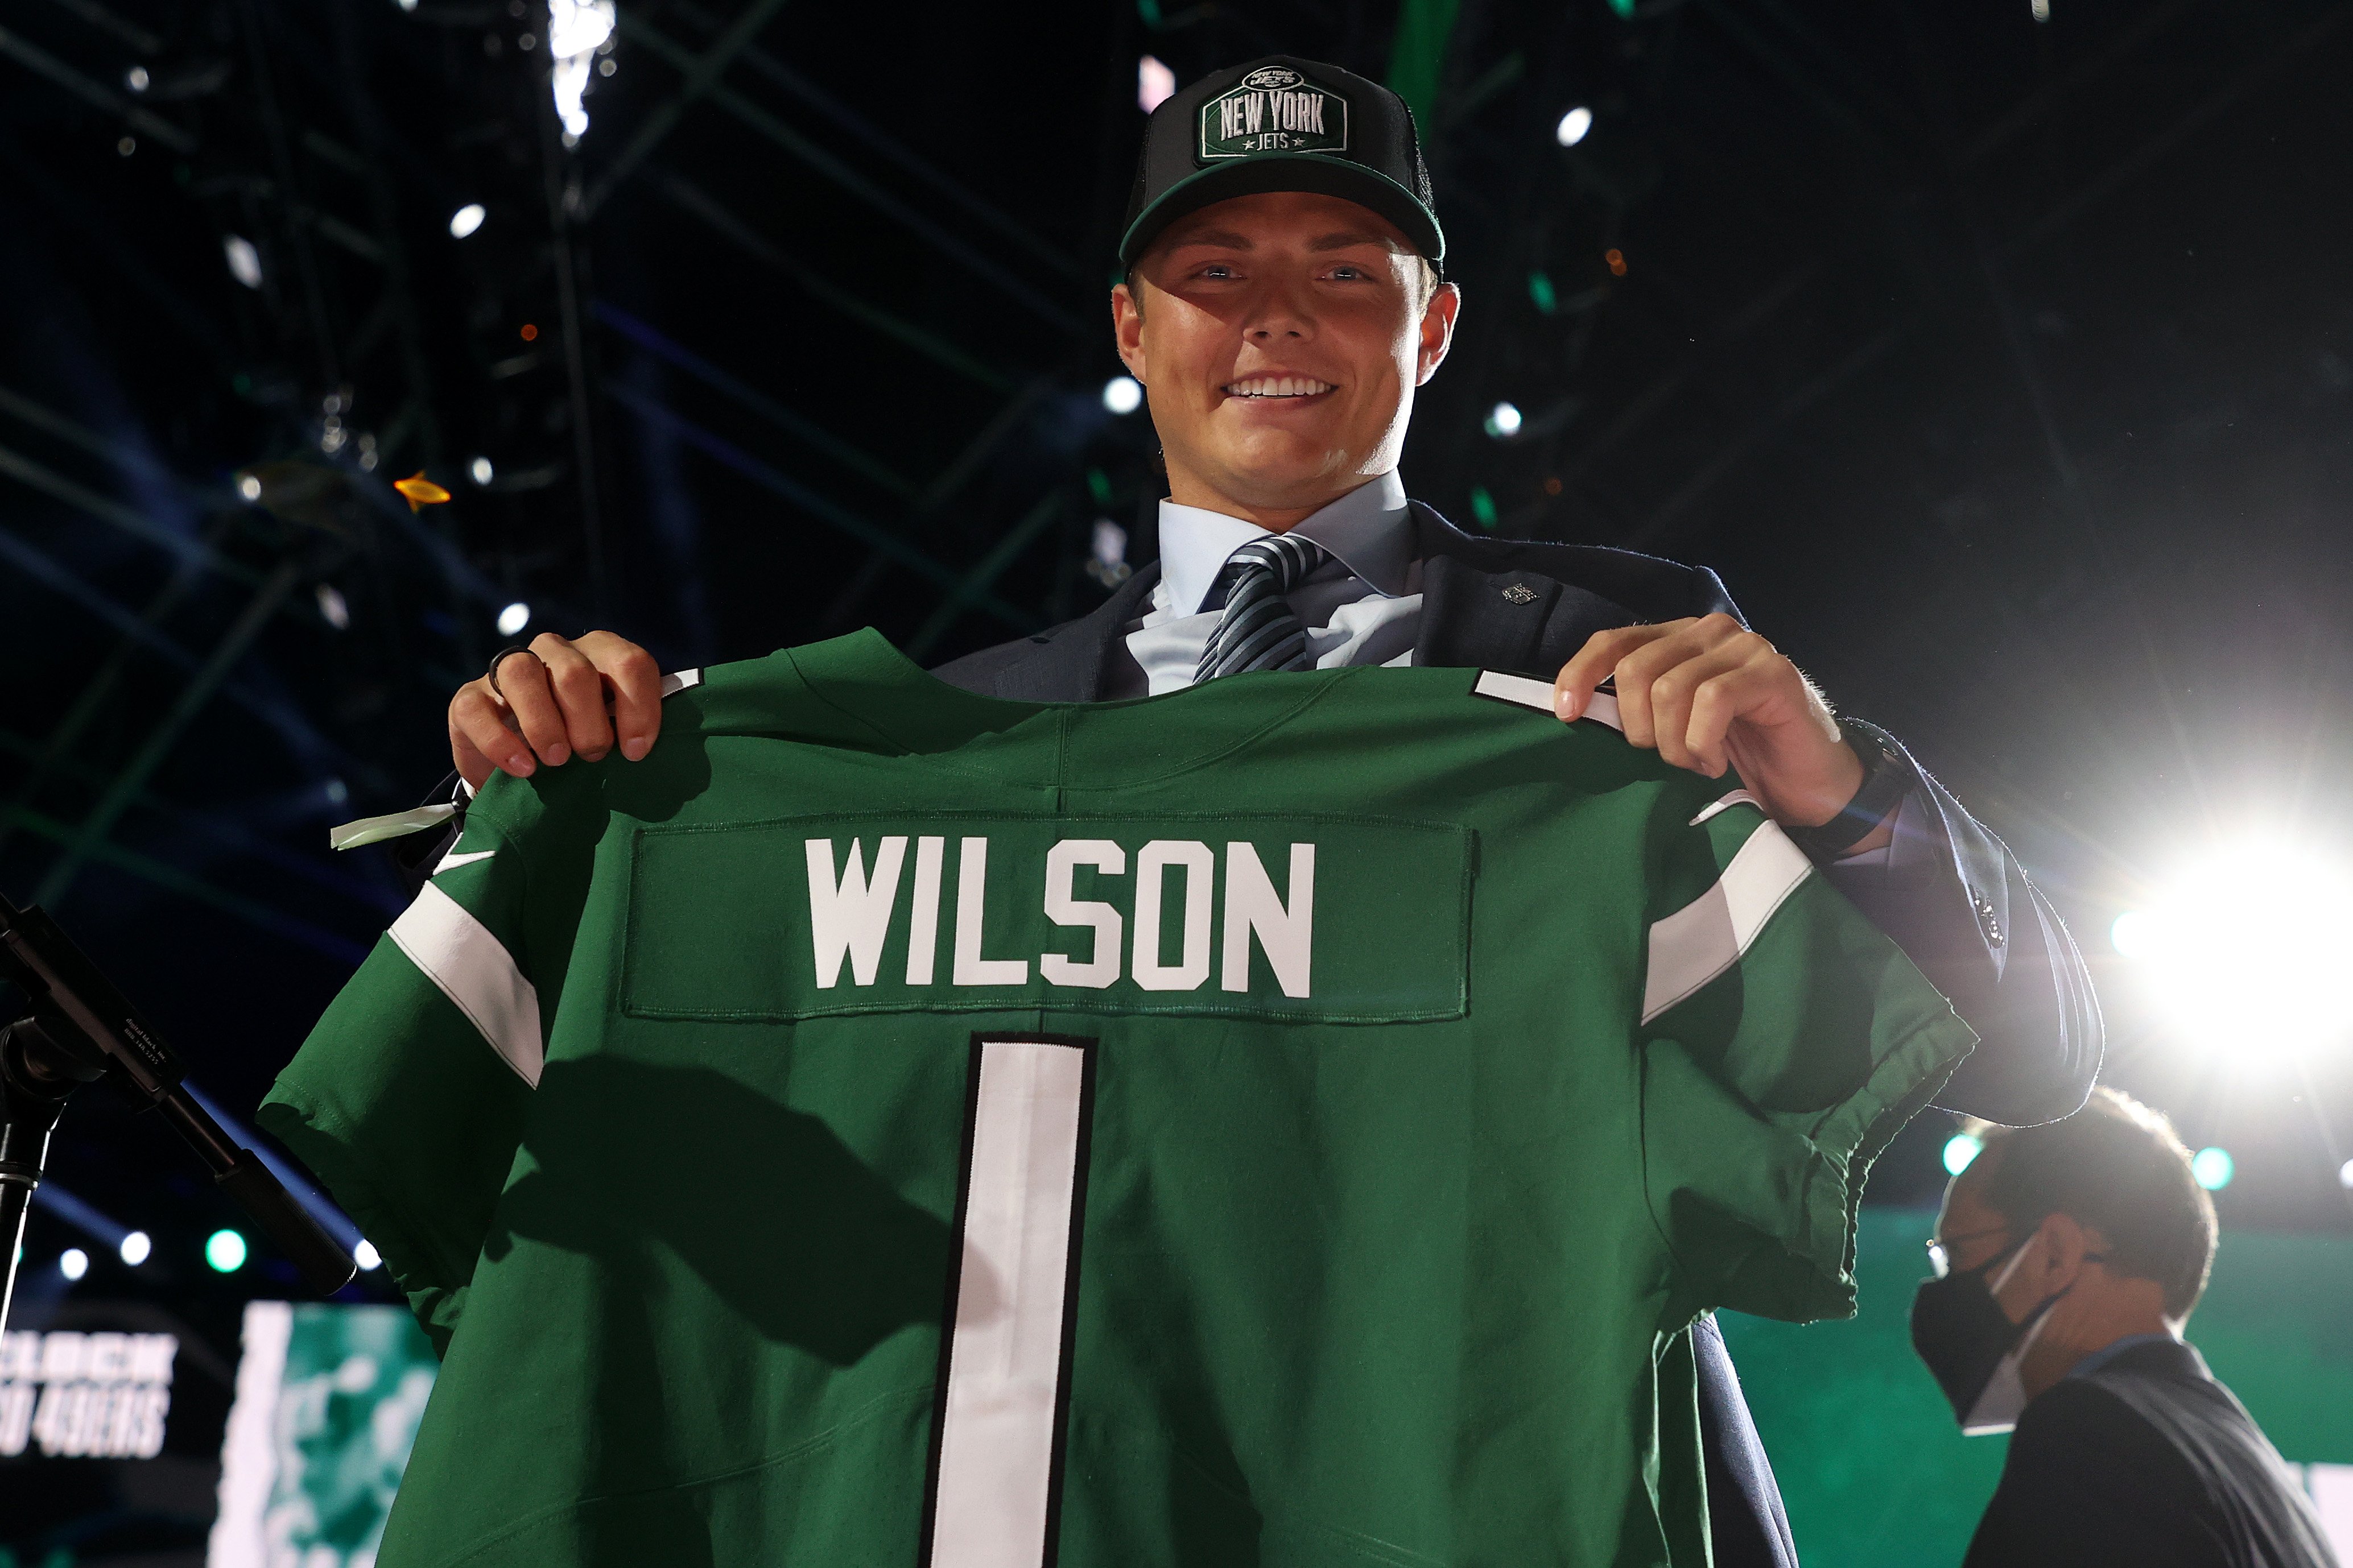 Zach Wilson poses for photo while holding Jets jersey after being drafted on April 29, 2021